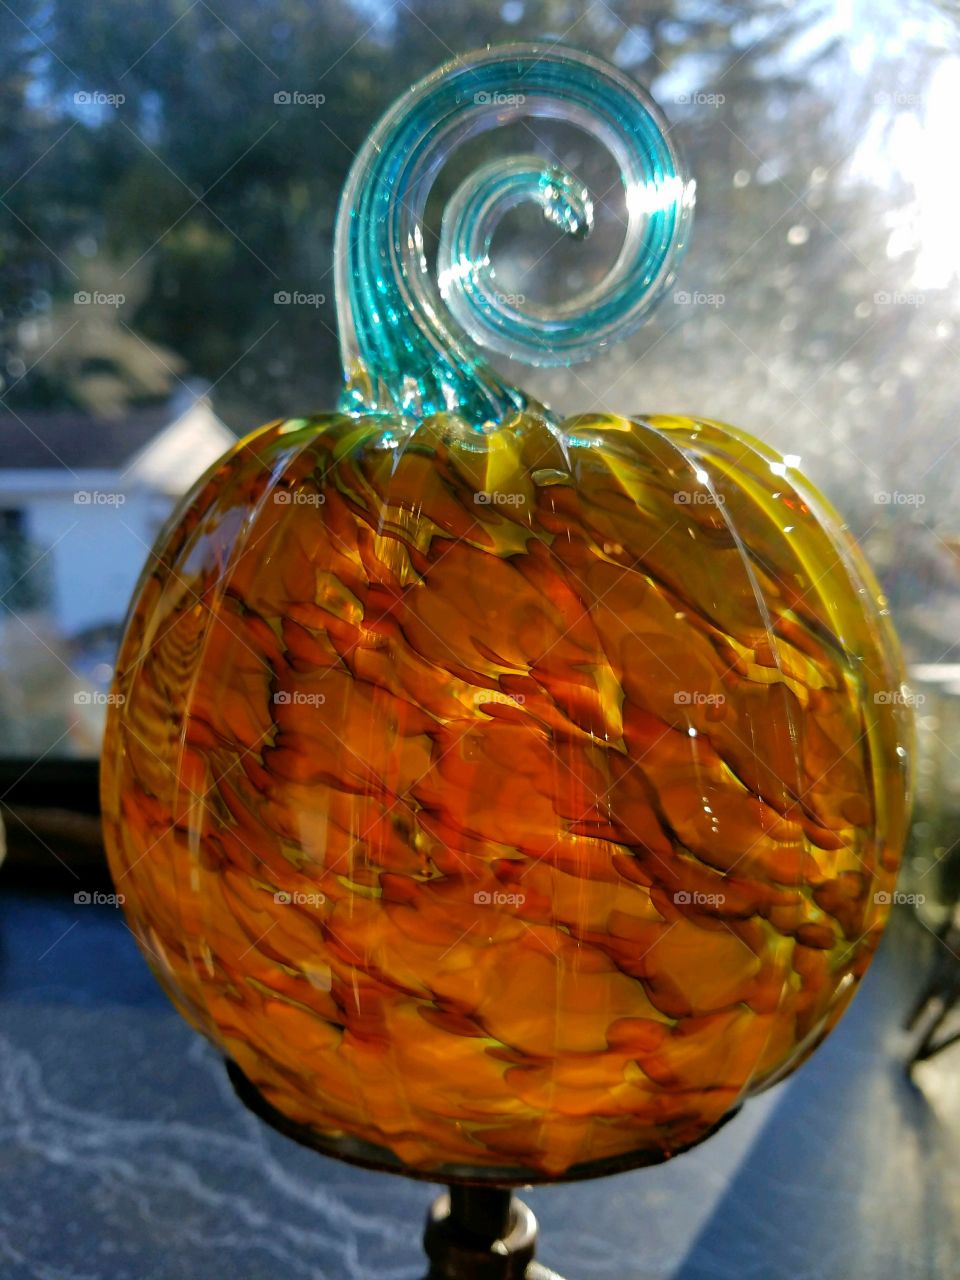 Handblown glass pumpkin seen with sun shining through, showing all colors of glass used. Stem is blue and spiral shape.